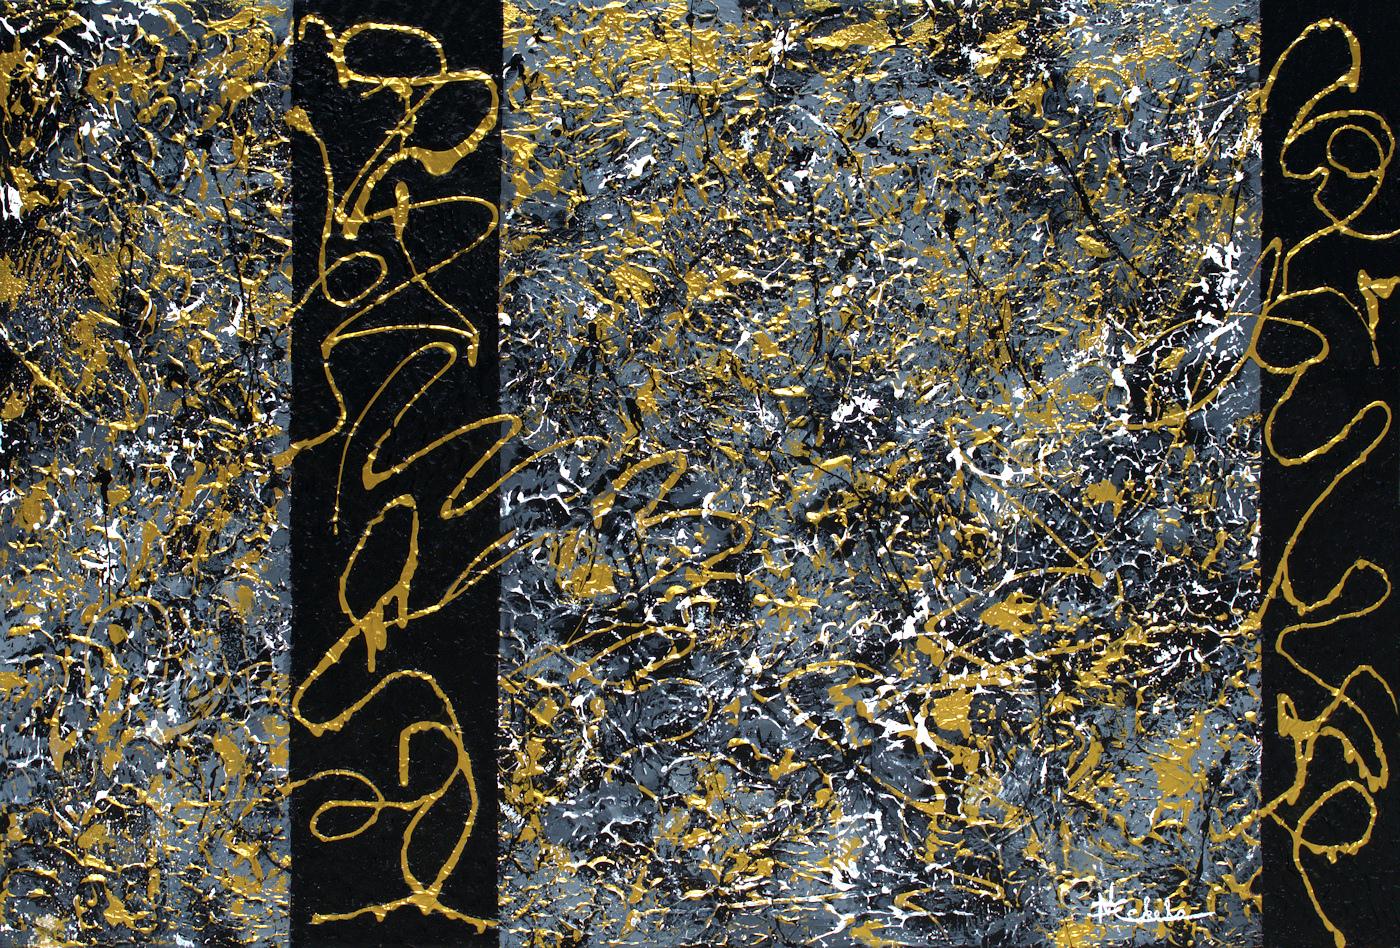 Nancy Eckels Abstract Painting - "Black Tie Affair" mixed media abstract with textural black, tan, gold, grays